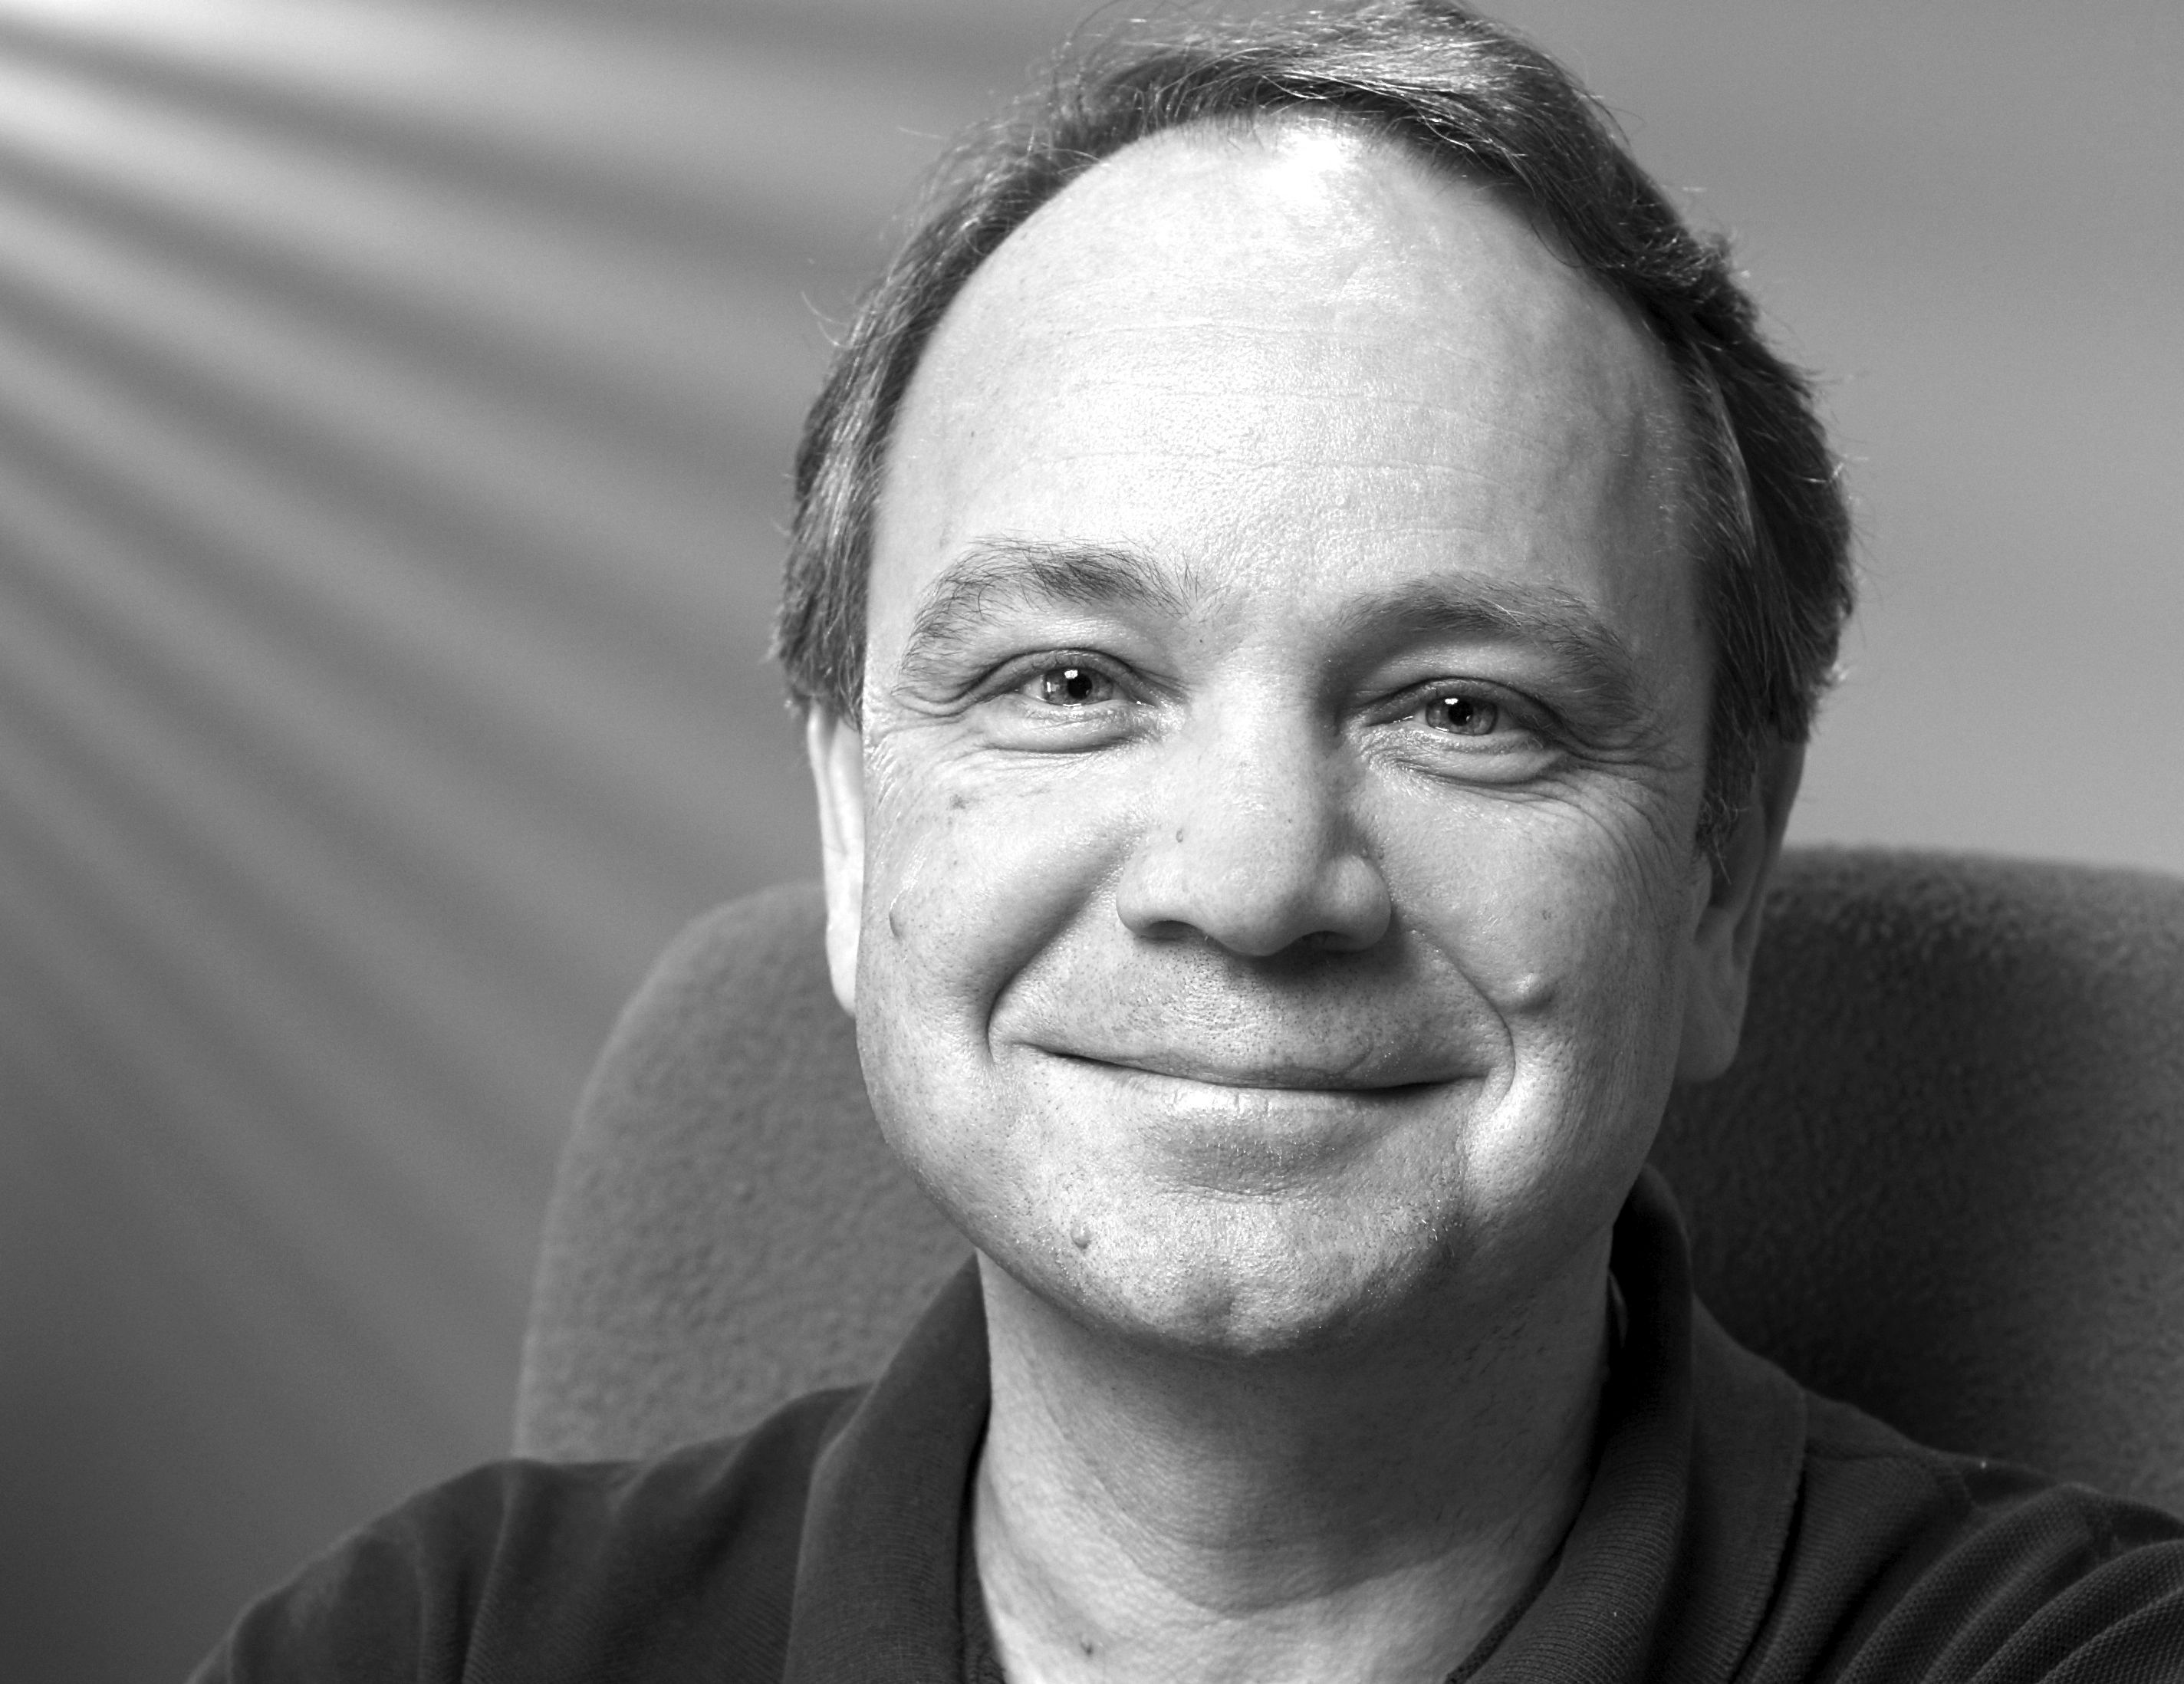  Sid Meier doubts he could make Civilization today, or that he'd even play if it he did 